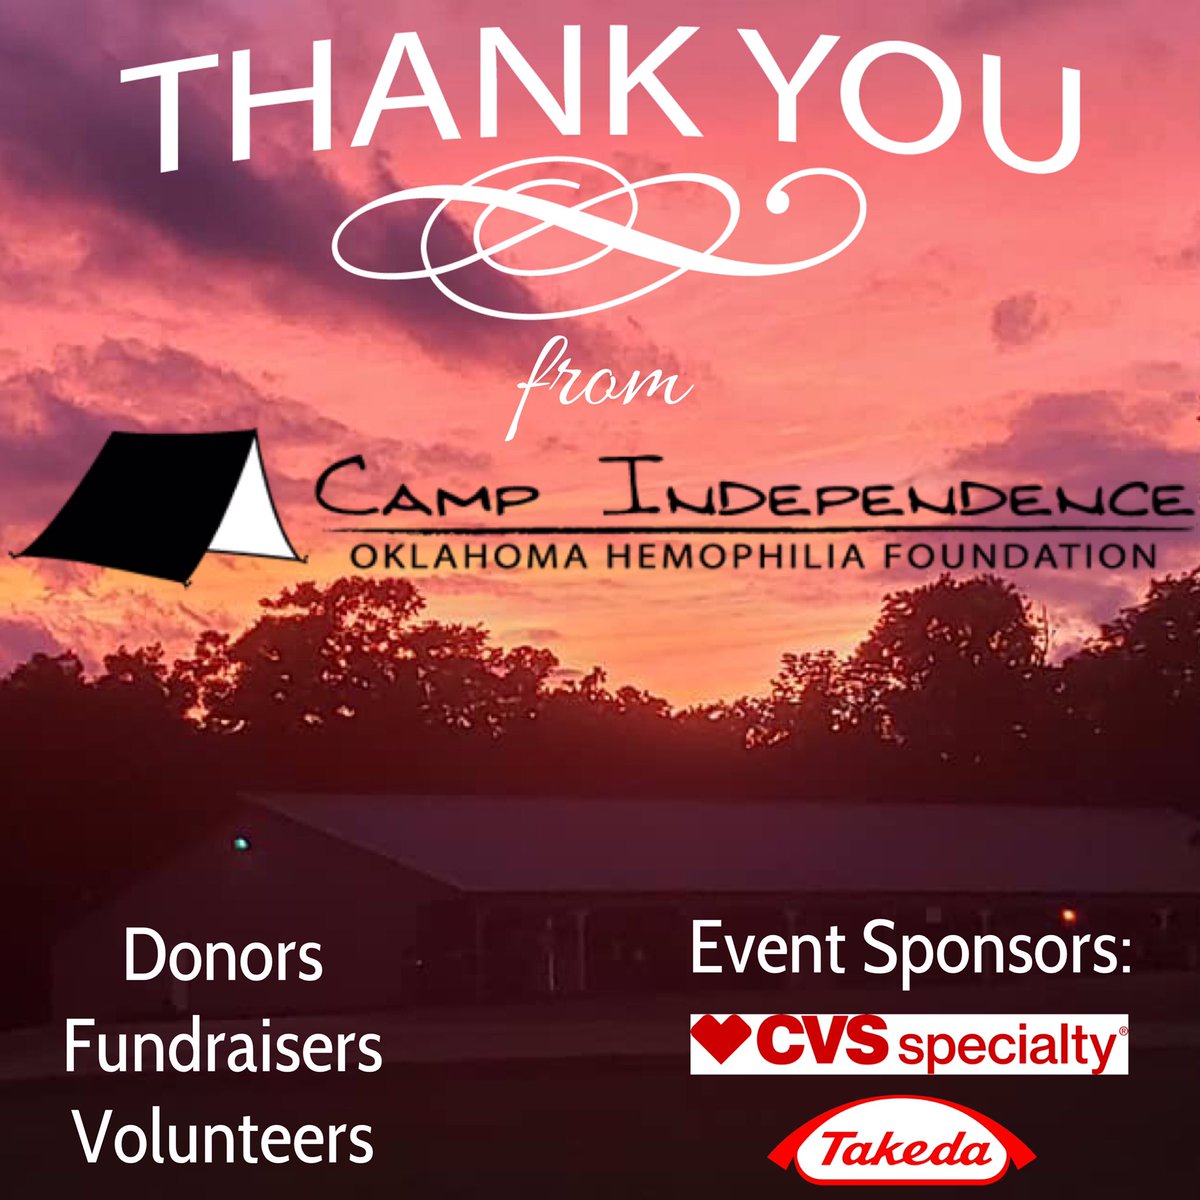 🏕🏴‍☠️ Thank you to everyone who makes Camp Independence possible. ❤️🙏🏻Thank you to our donors, fundraisers, and volunteers. Thank you to our event sponsors: CVS Specialty Pharmacy and Takeda. 
#CampIndependenceOHF
#BleedingDisorders
#Hemophilia
#VonWillebrands 
#FactorDeficiency